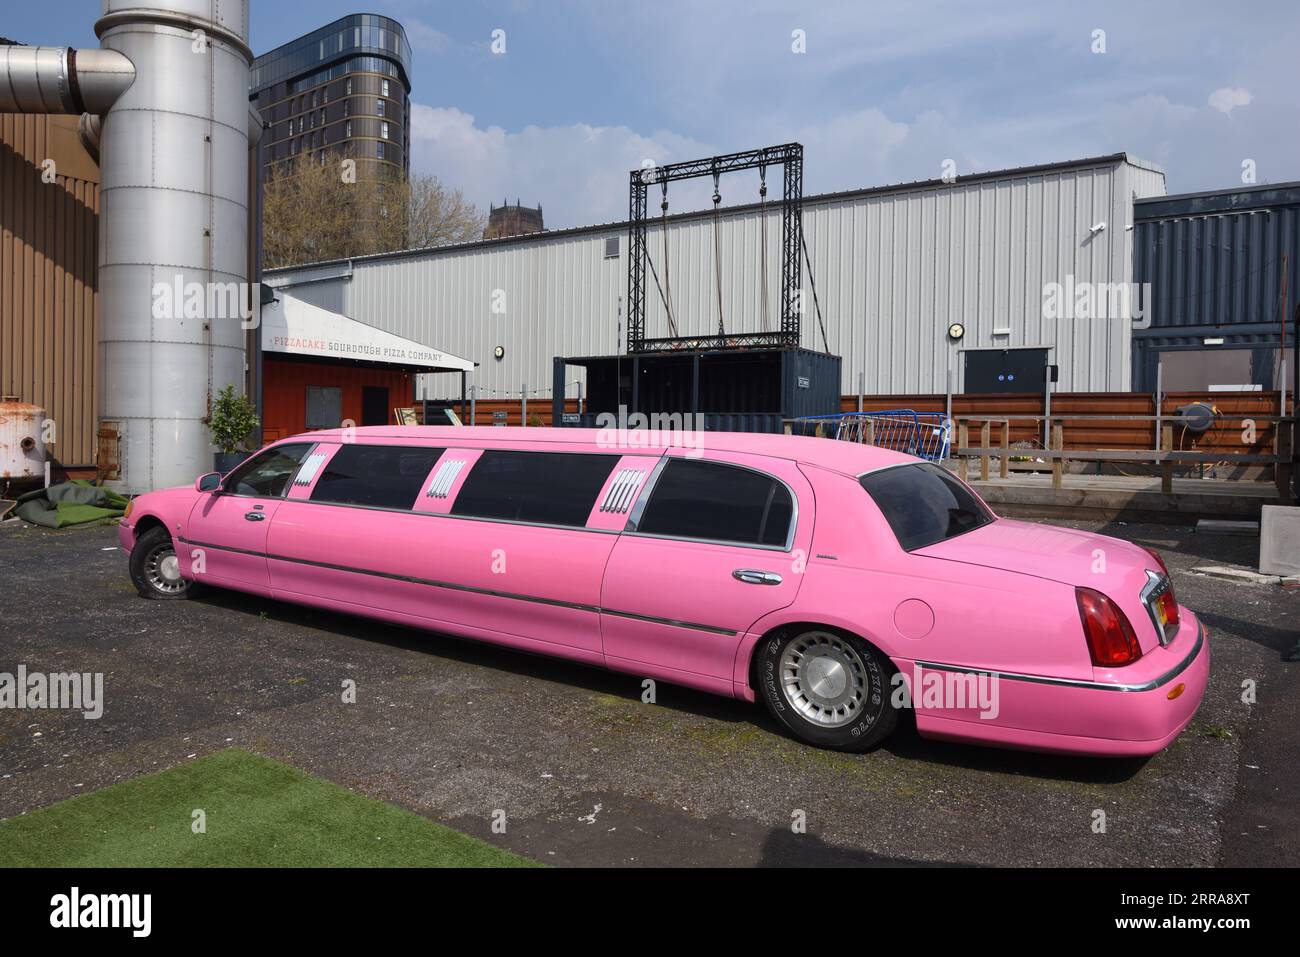 Pink Lincoln Navigator Luxury Car, Stretch Limousine or Long Wheelbase Limousine Stock Photo